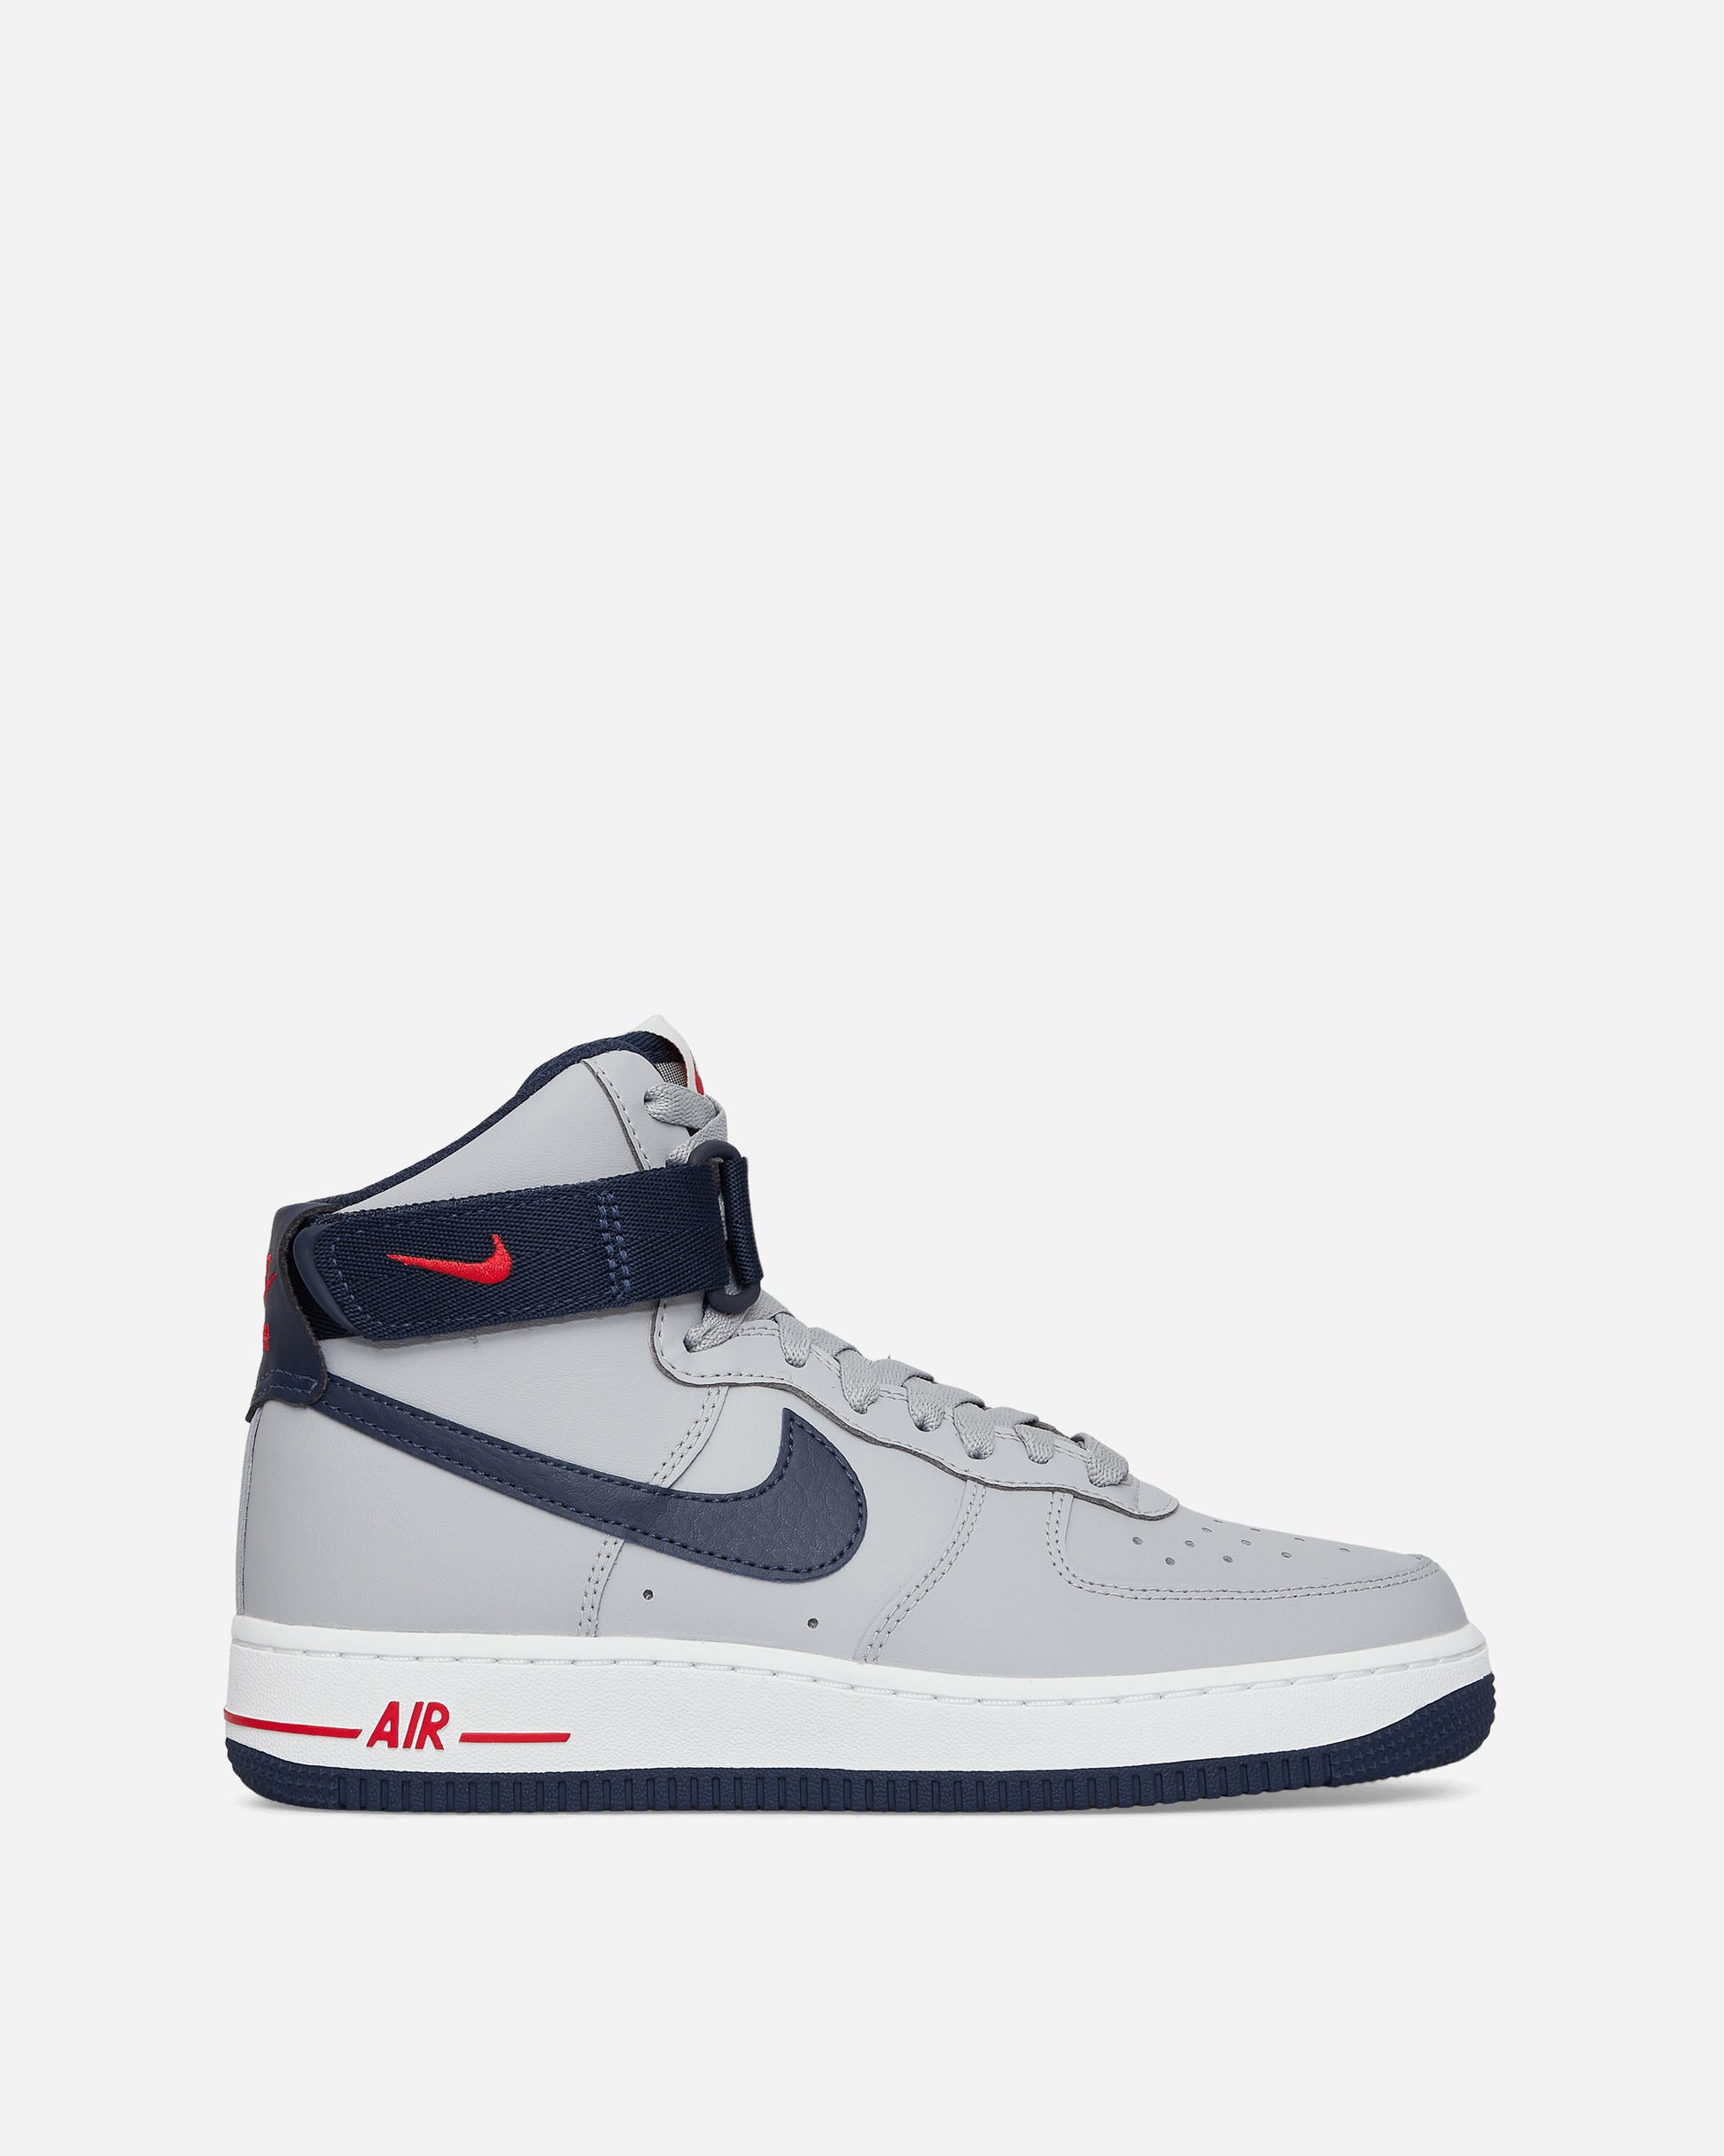 Nike Wmns Air Force 1 Hi Qs Wolf Grey/College Navy Sneakers High DZ7338-001